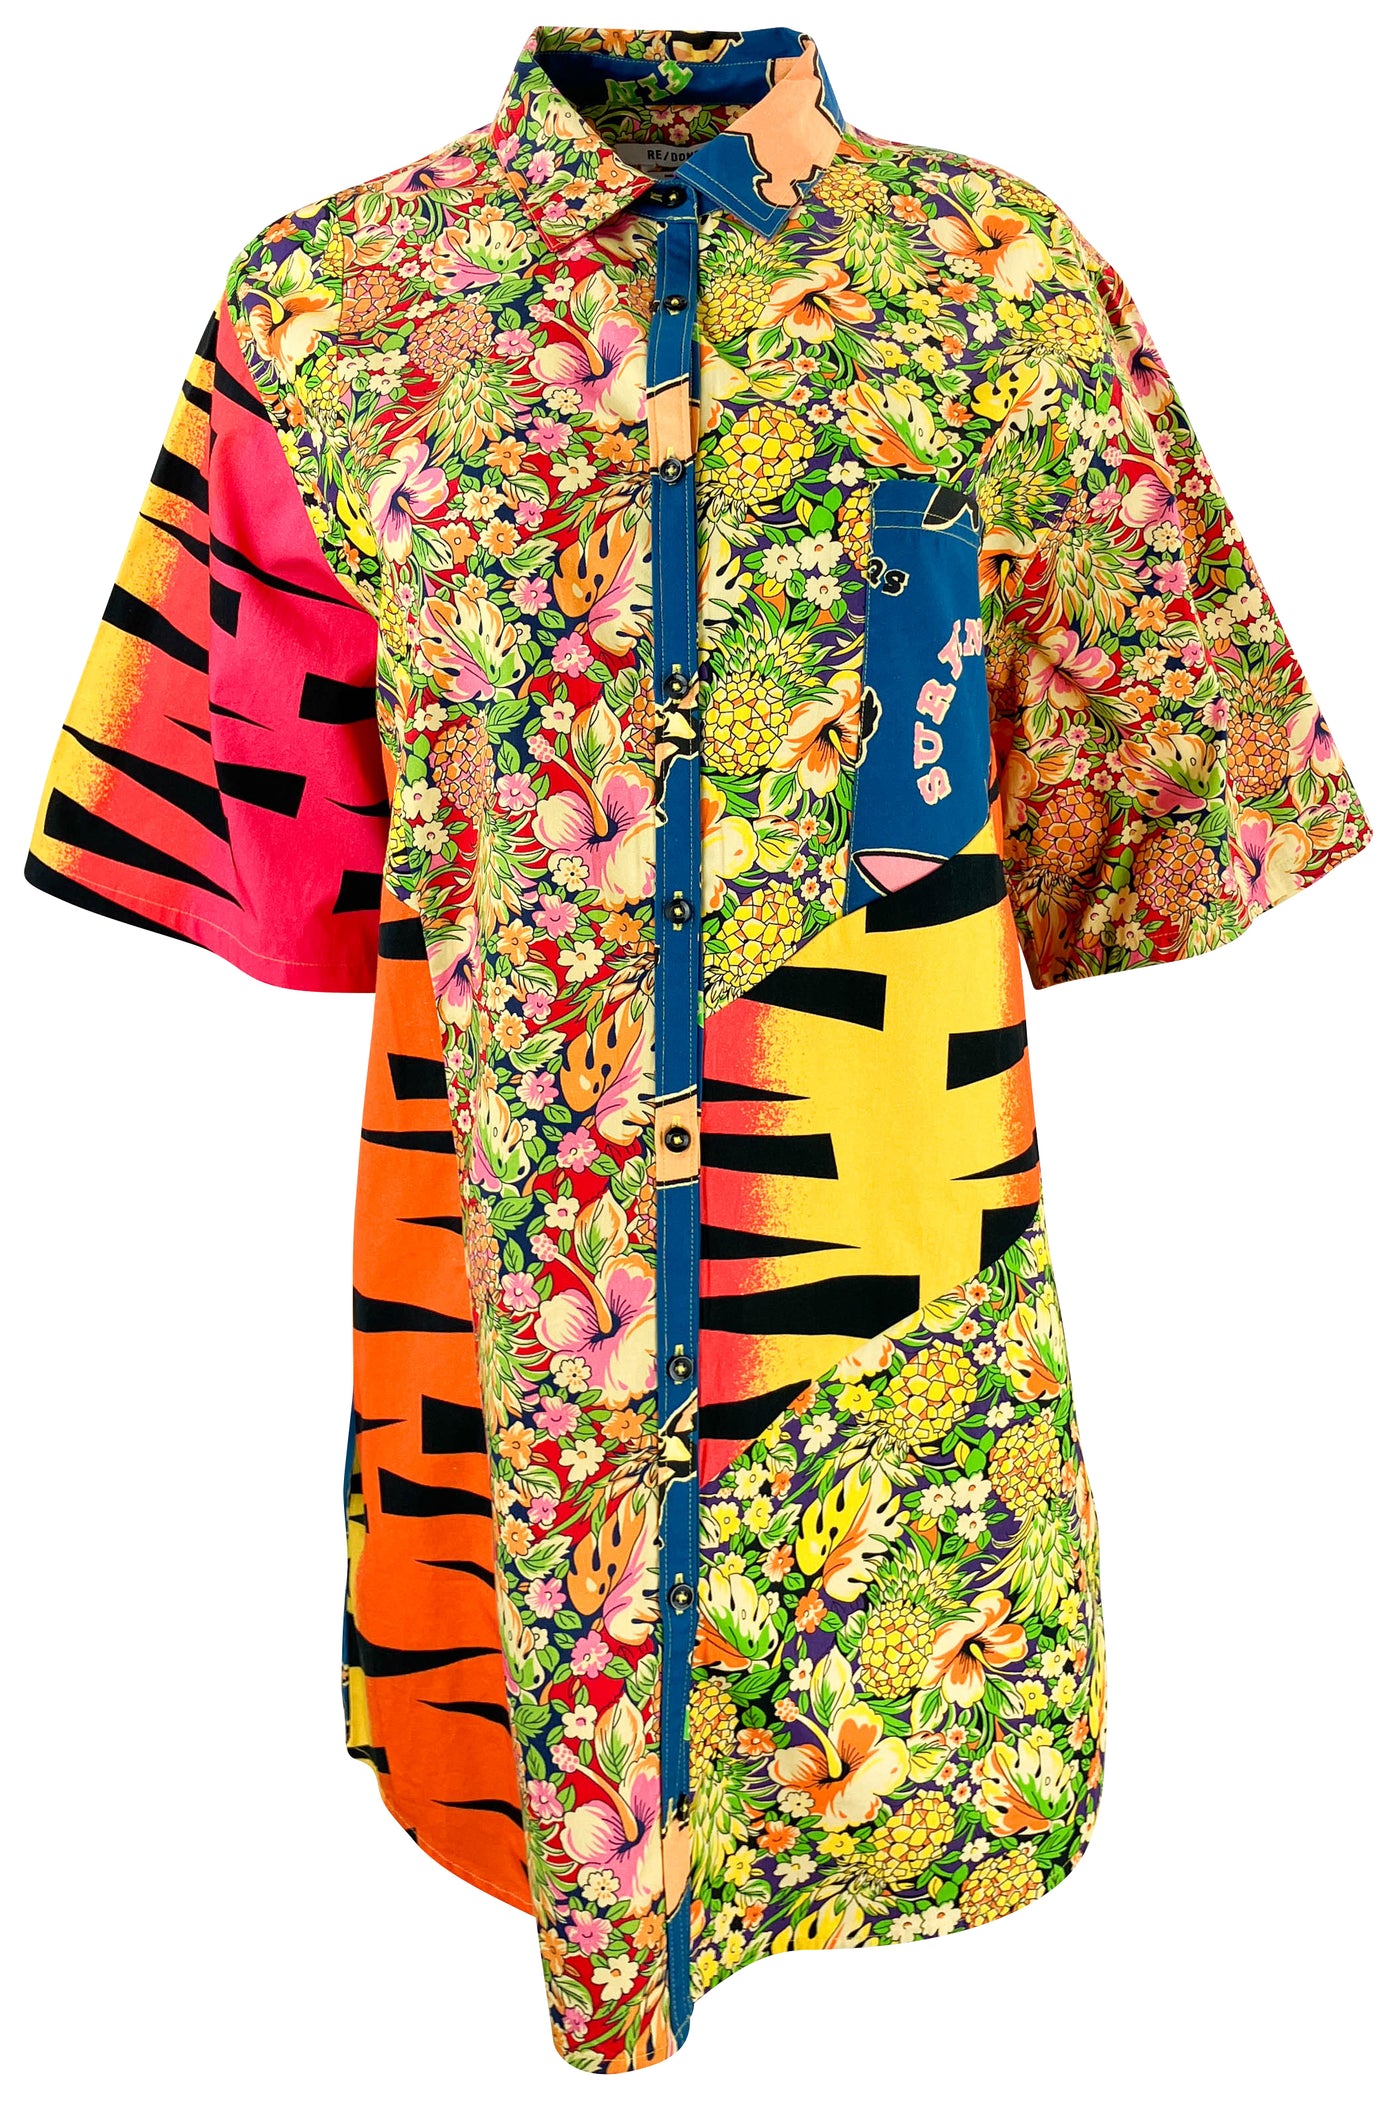 RE/DONE Oversized Patchwork Shirtdress in Multi-Pineapple - Discounts on RE/DONE at UAL